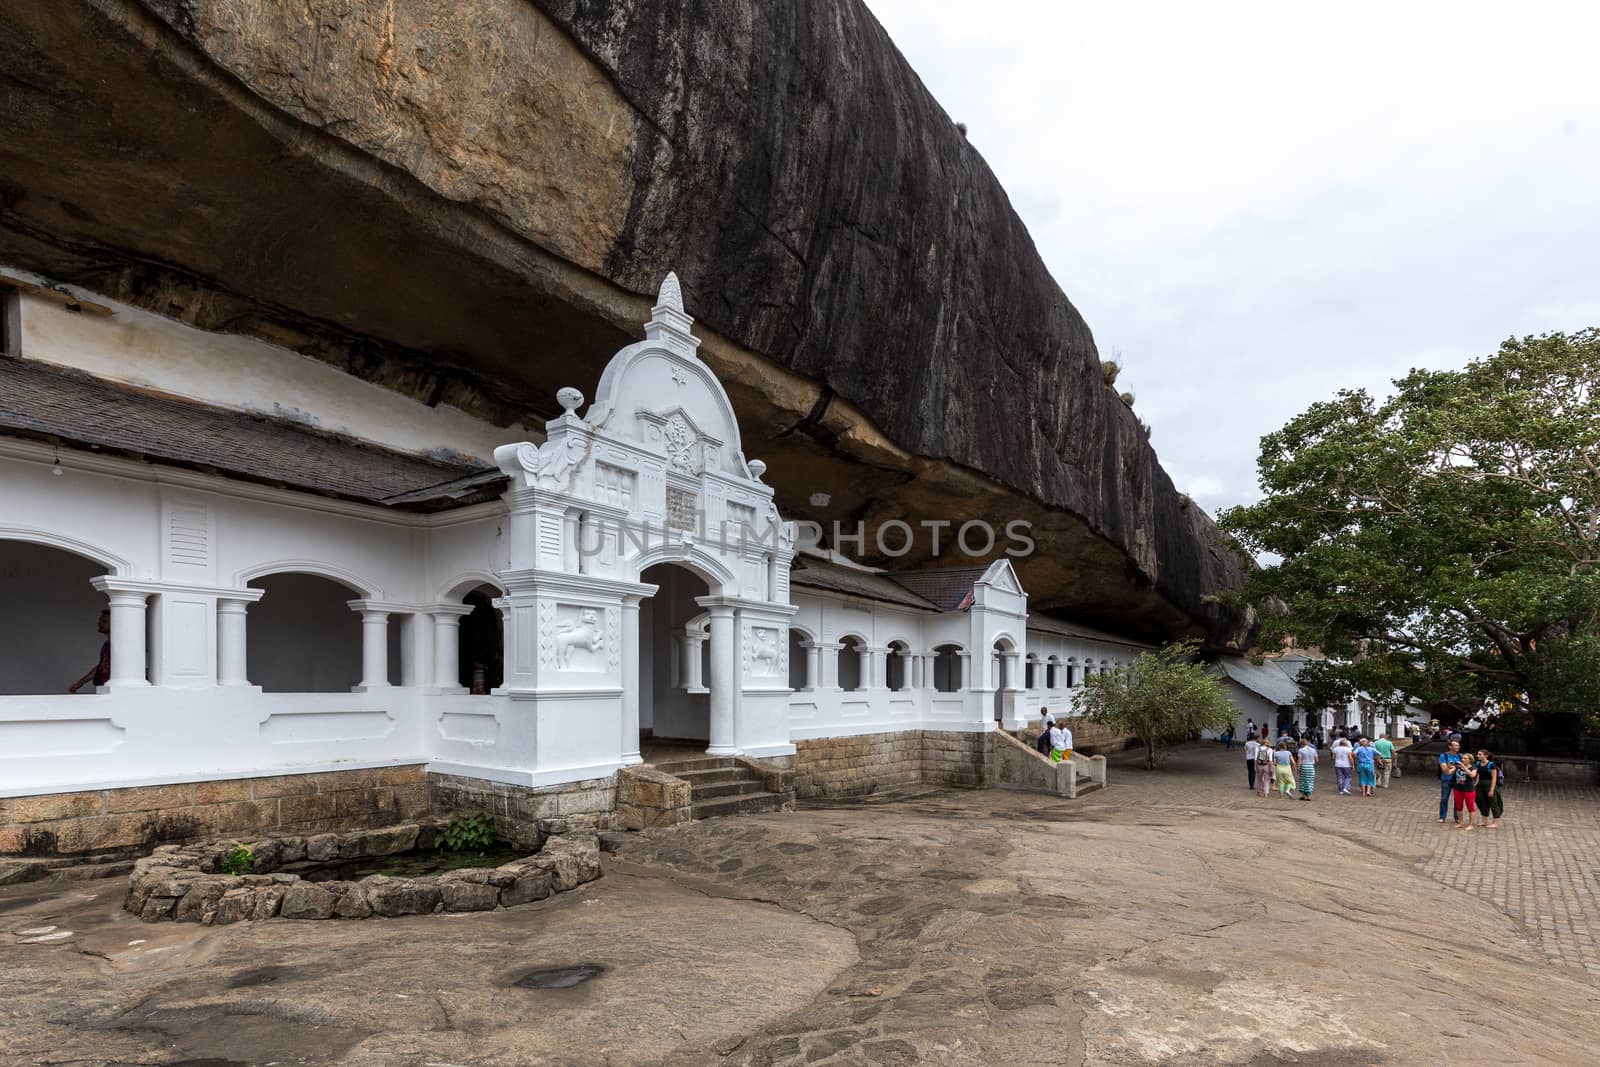 Dambulla, Sri Lanka - August 15, 2018: People in front of the Dambulla Cave Temple also known as the Golden Temple